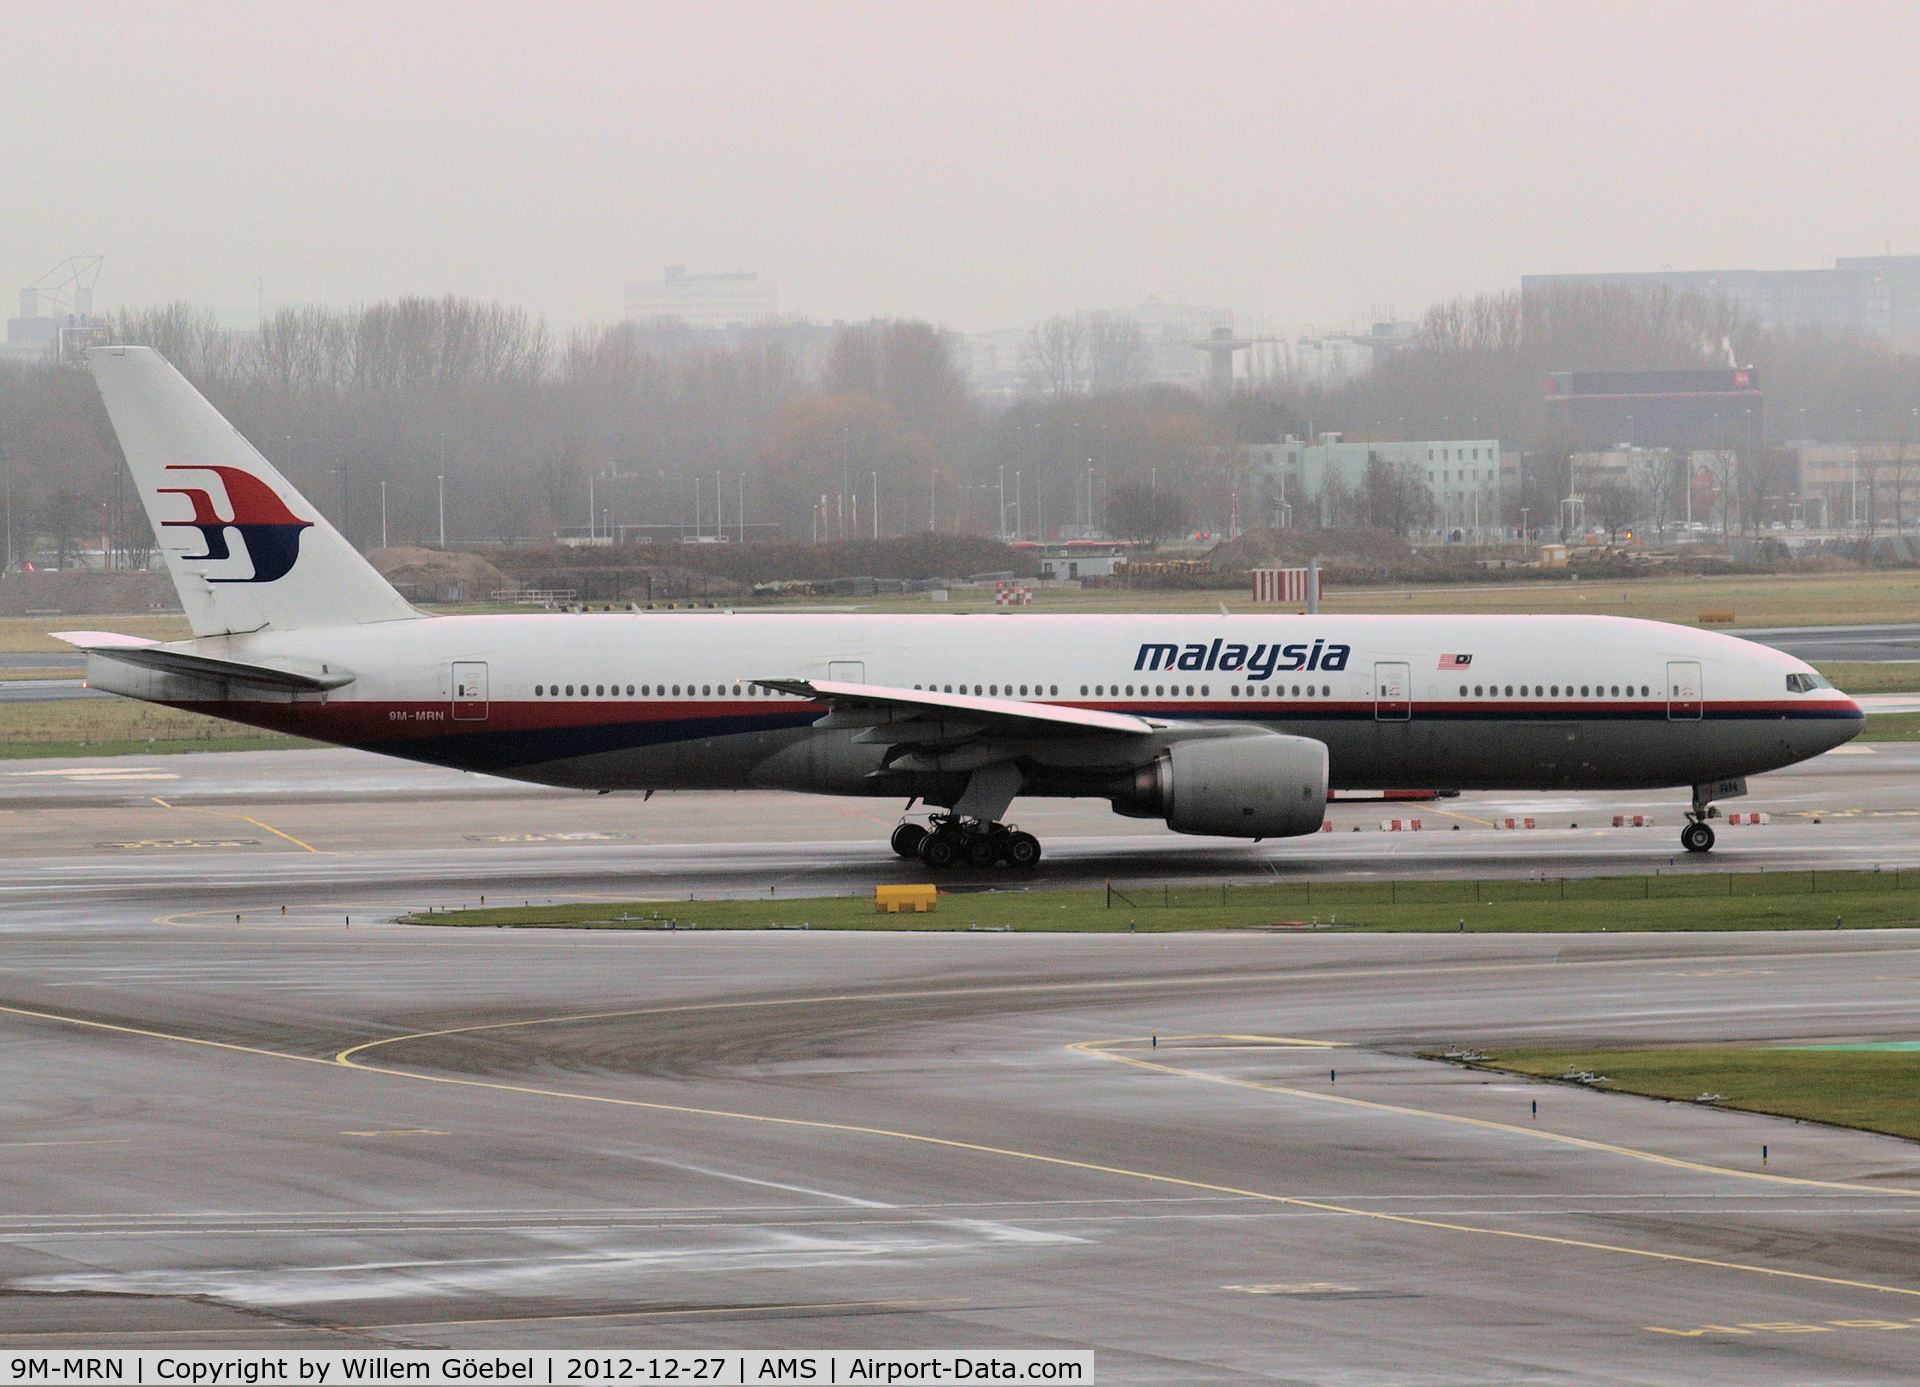 9M-MRN, 2002 Boeing 777-2H6/ER C/N 28419, Taxi to runway 24 of Amsterdam Airport for take off.